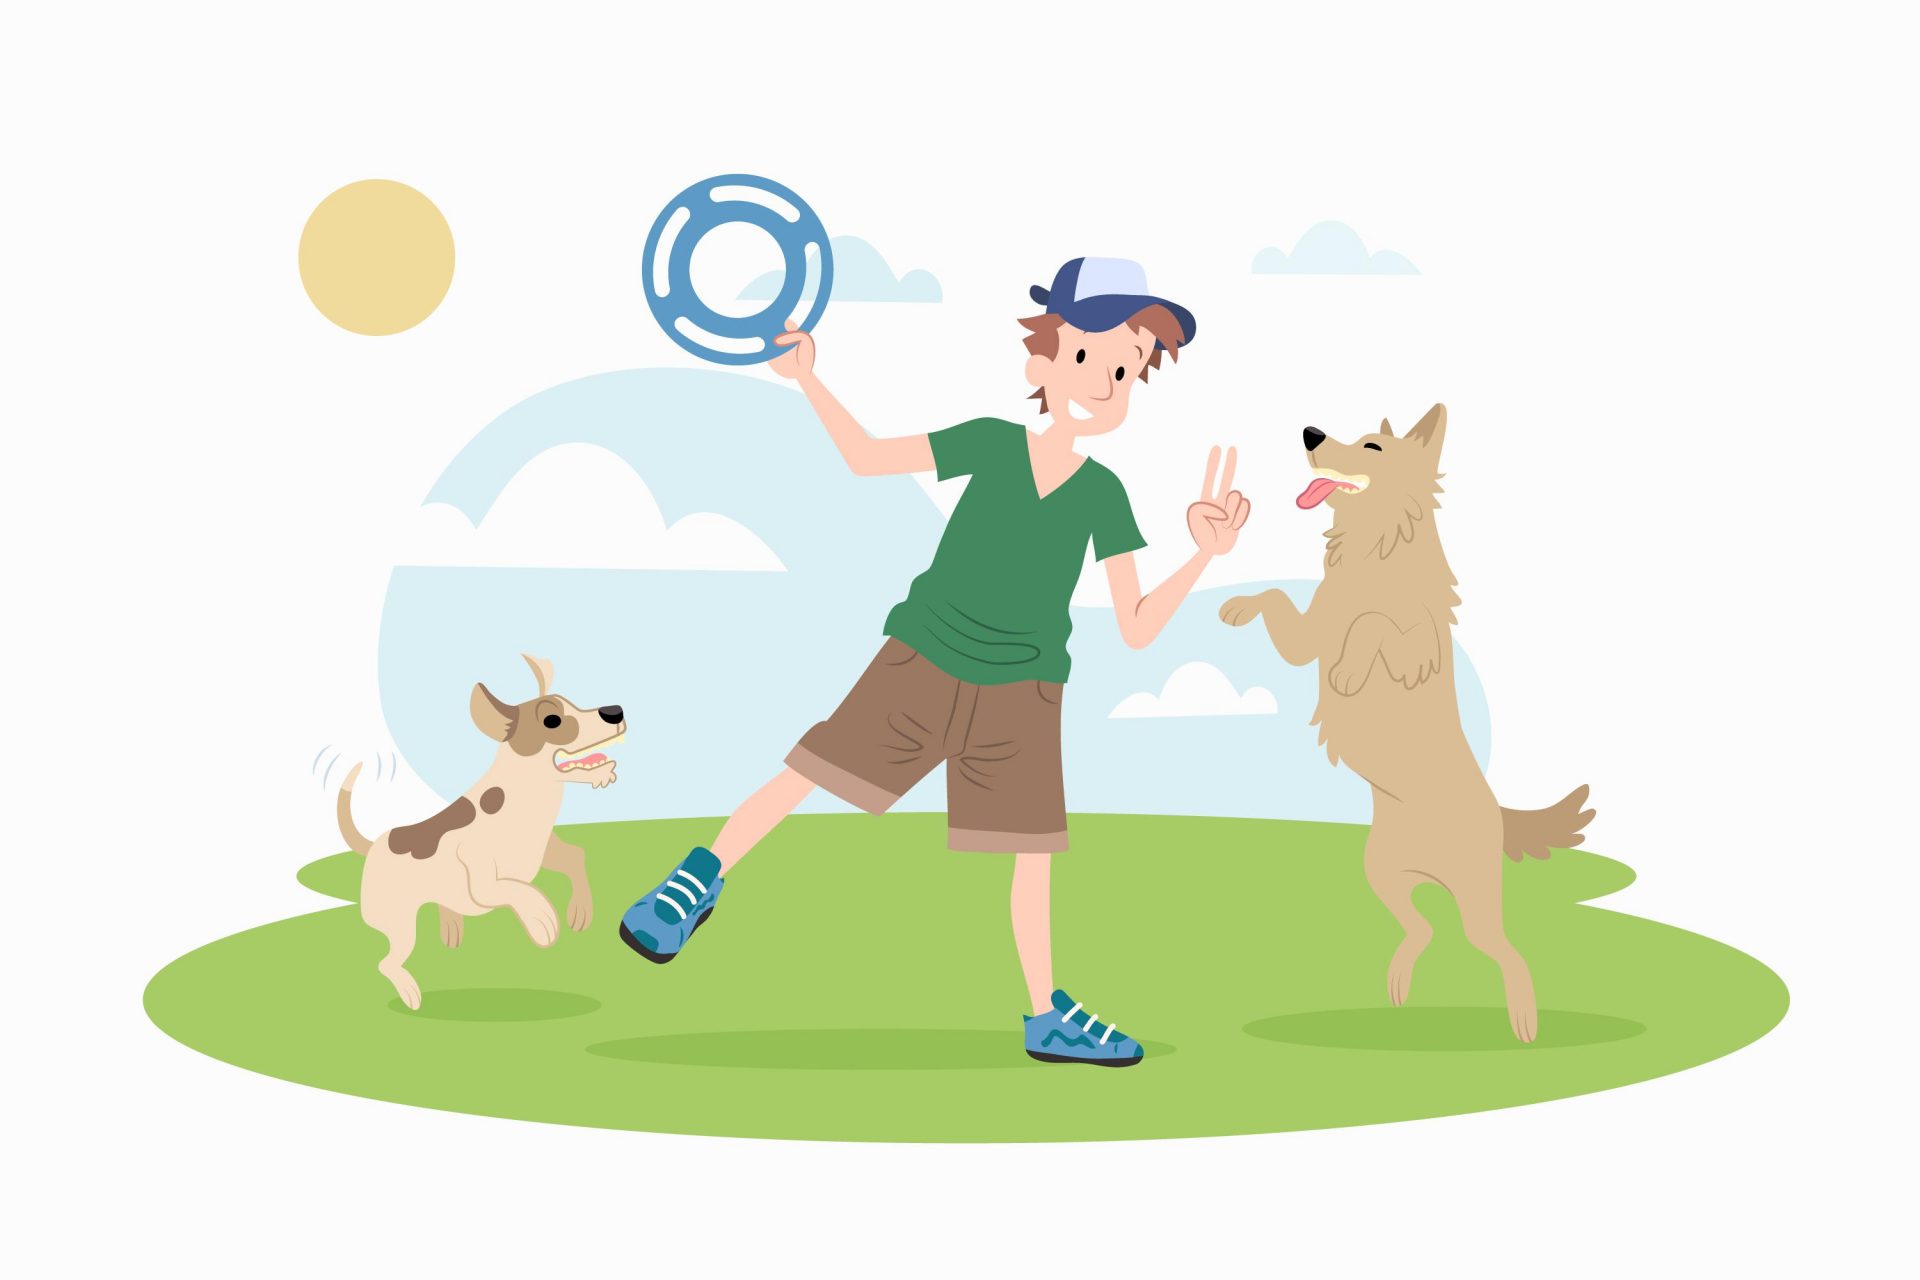 Want to Master Dog Training? What Are the Best Techniques to Train Your Dog Effectively?